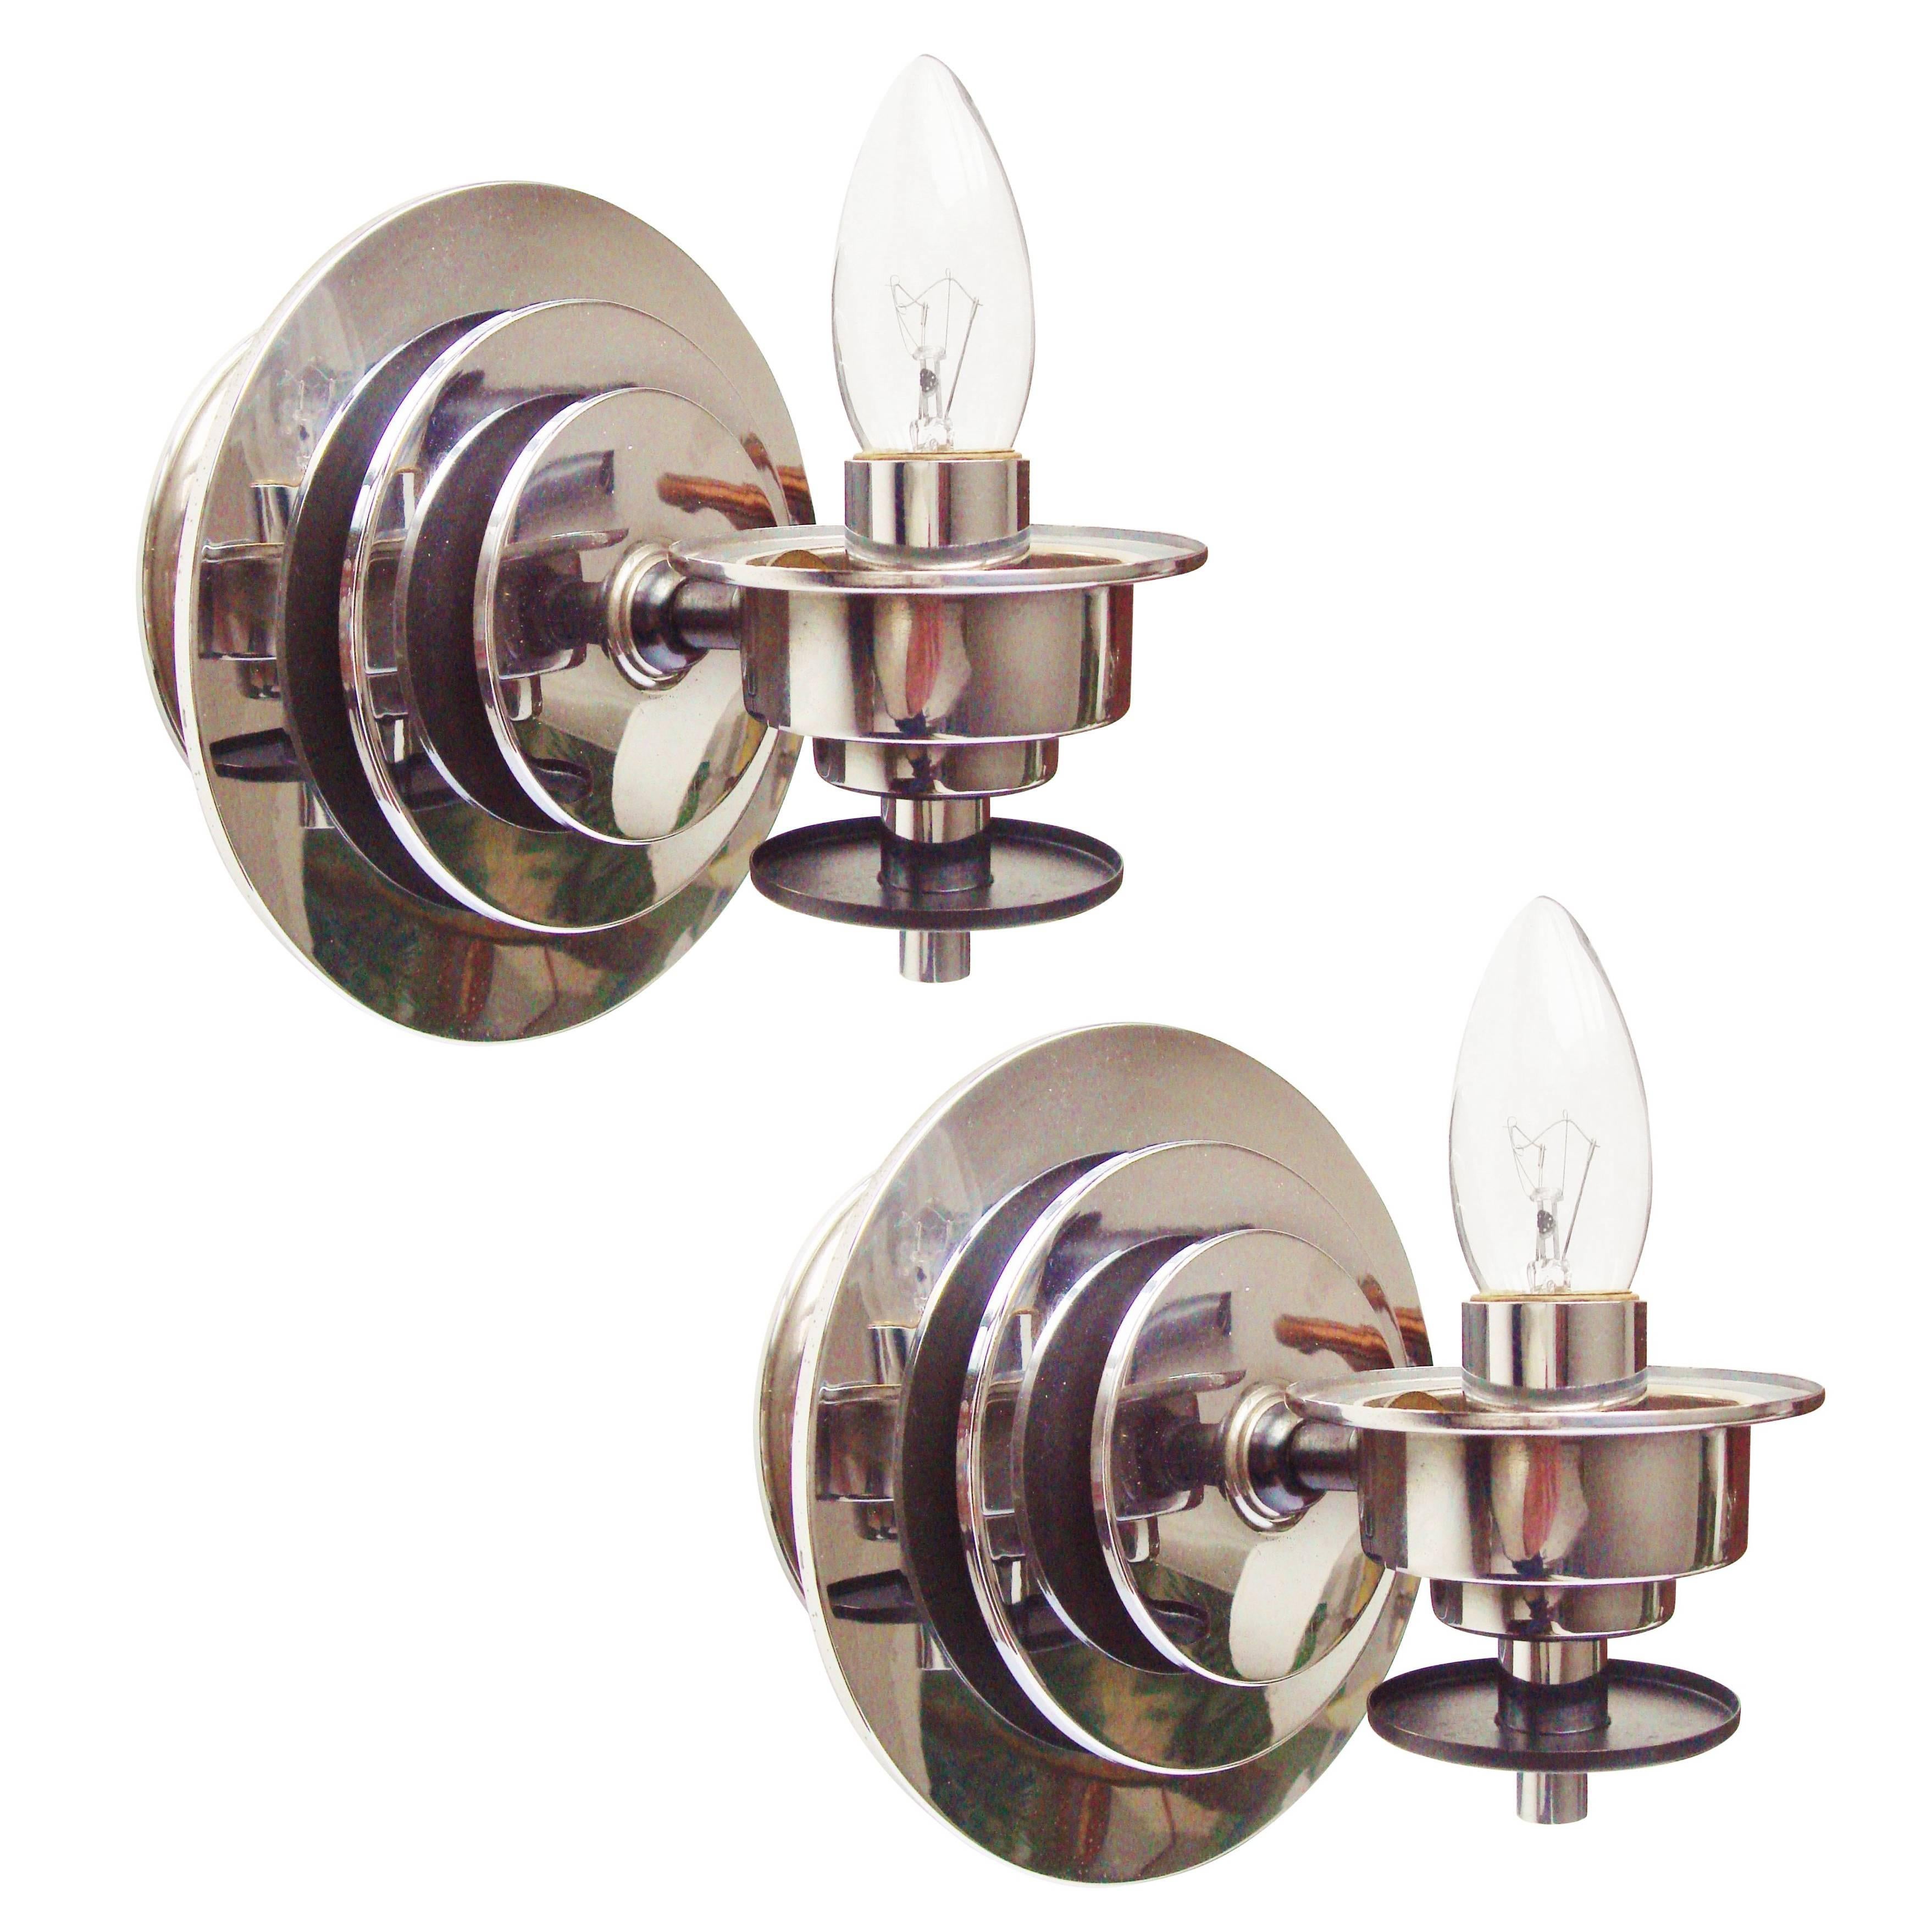 Pair of American Art Deco Revival Chrome and Black Candle-Form Wall Sconces